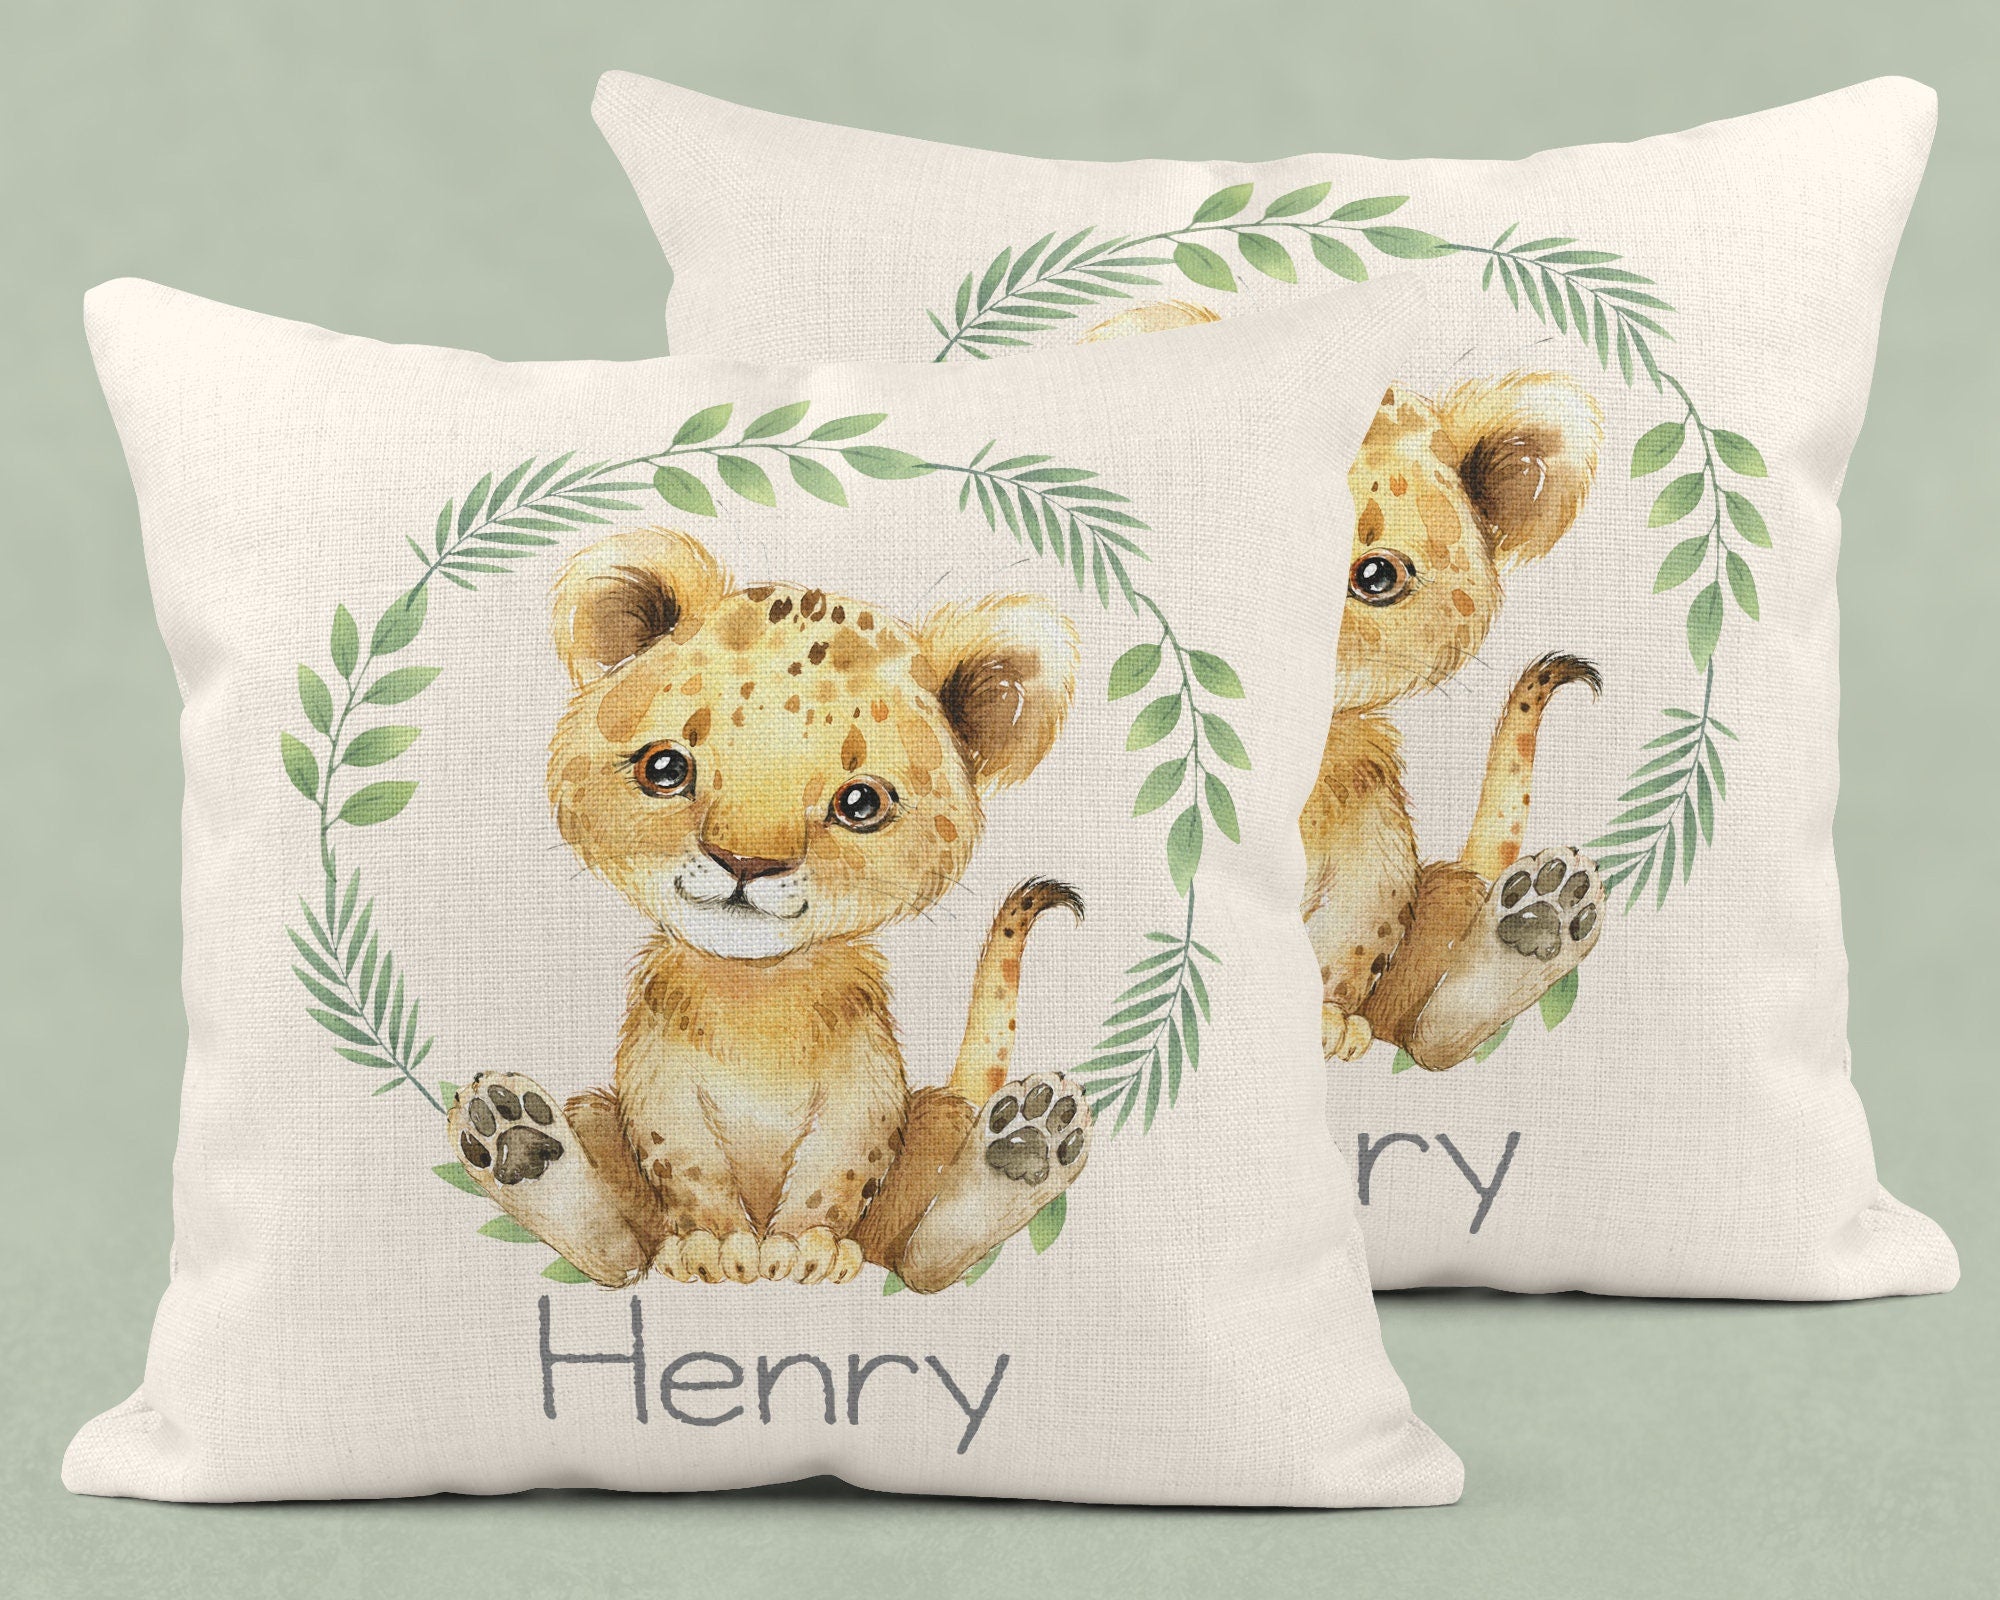 Personalised New Baby Cushion, Welcome To The World Cushion, New Baby Gifts, Safari Cushion, New Baby Present, Safari Nursery Decor